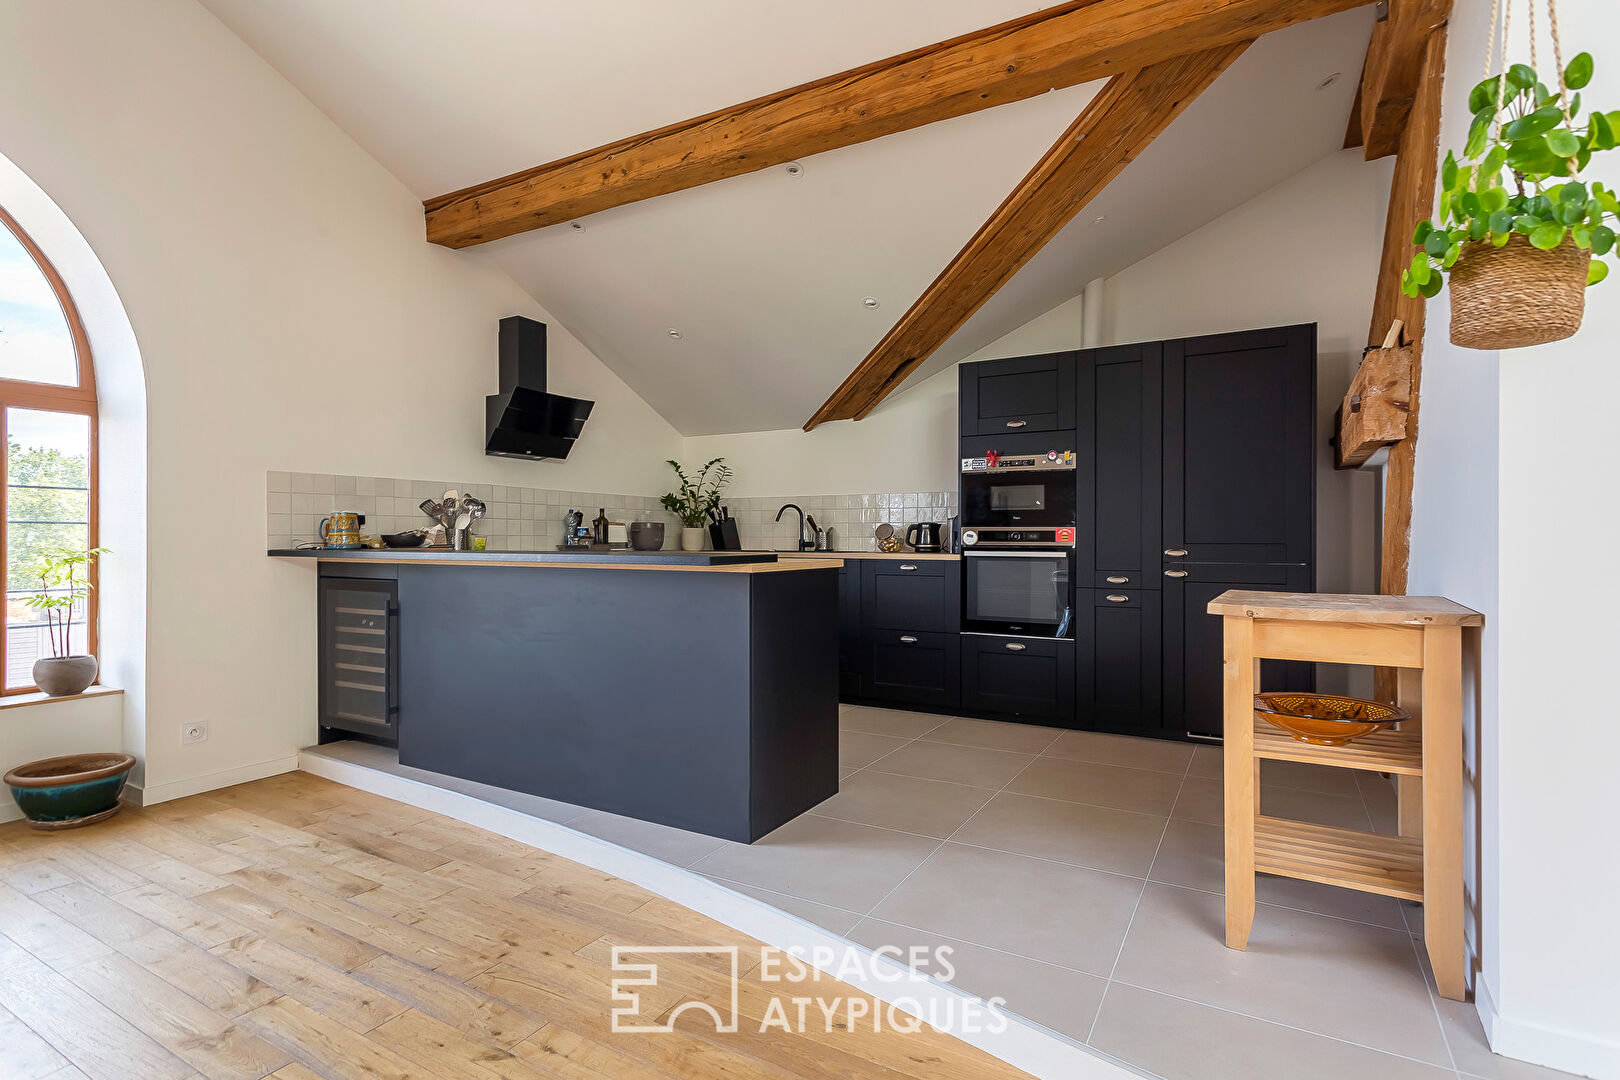 Renovated apartment in a former coaching inn